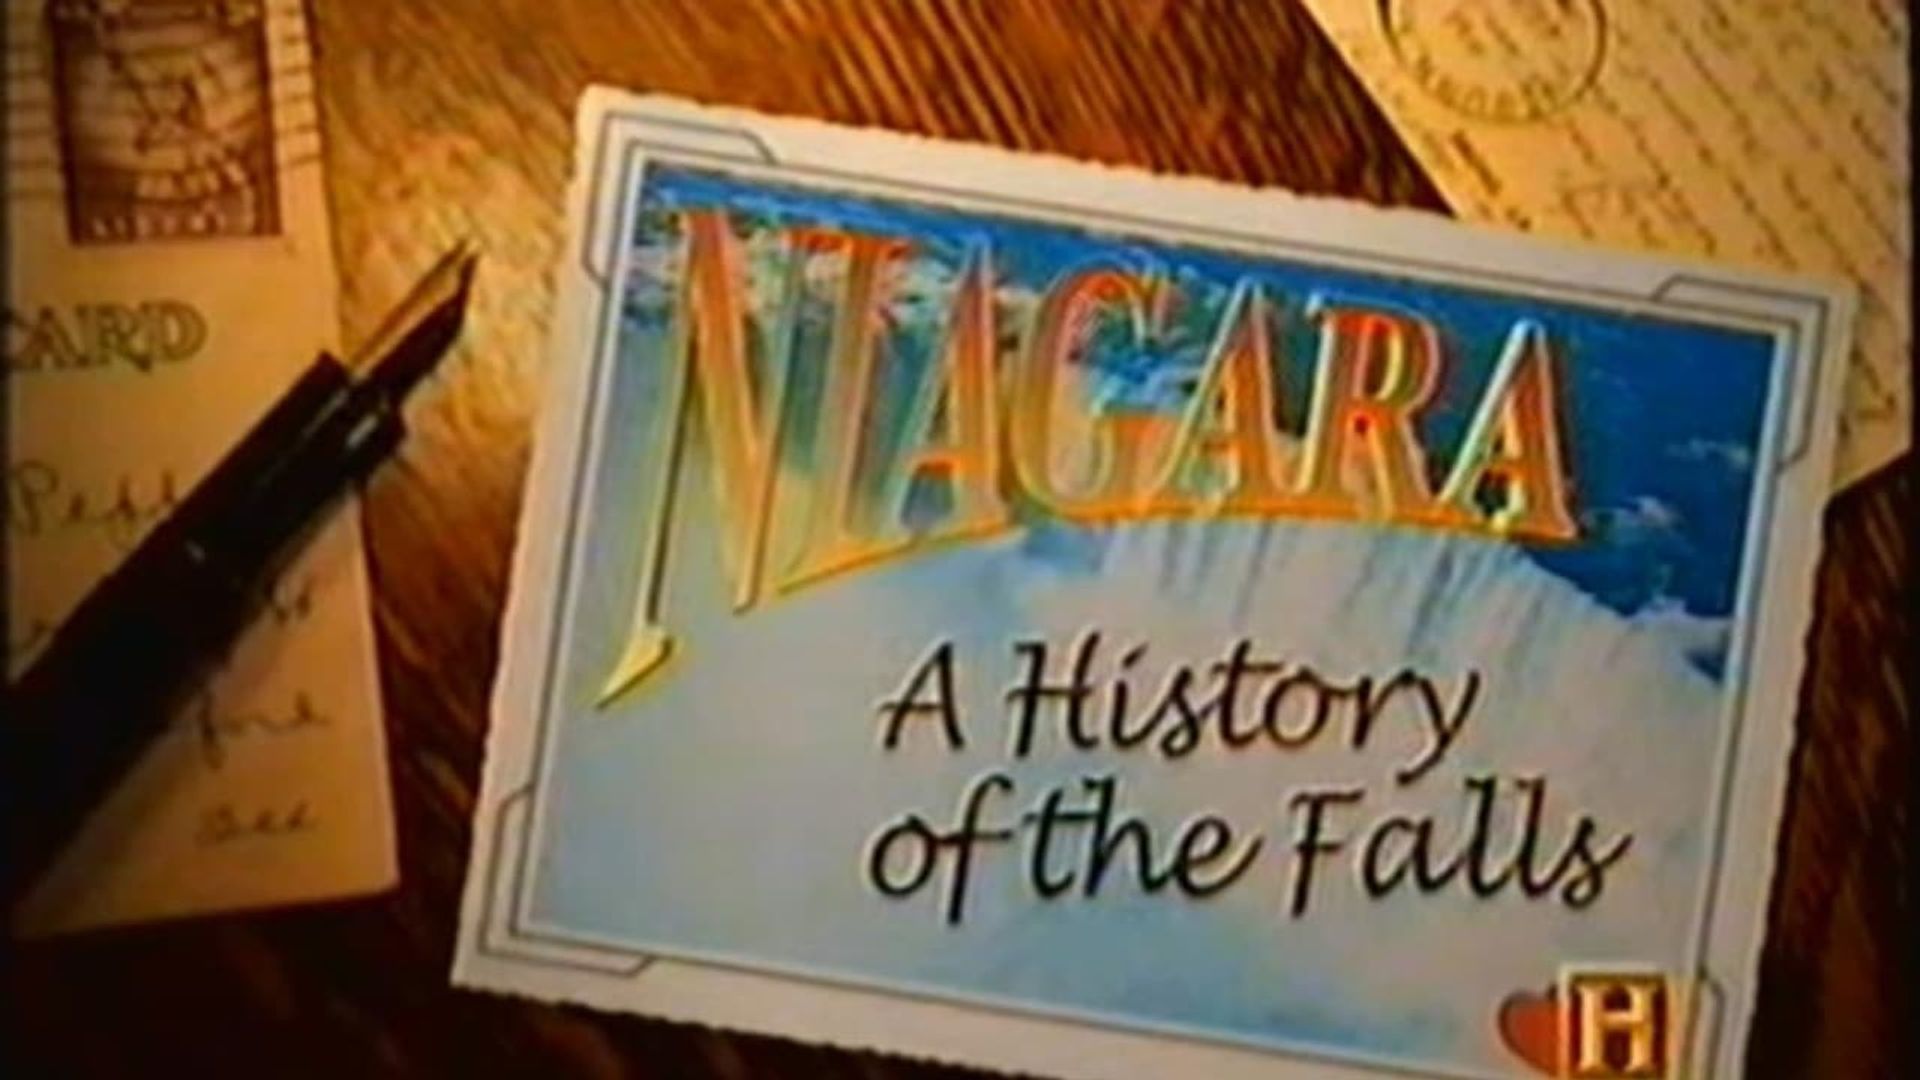 Niagara: A History of the Falls background